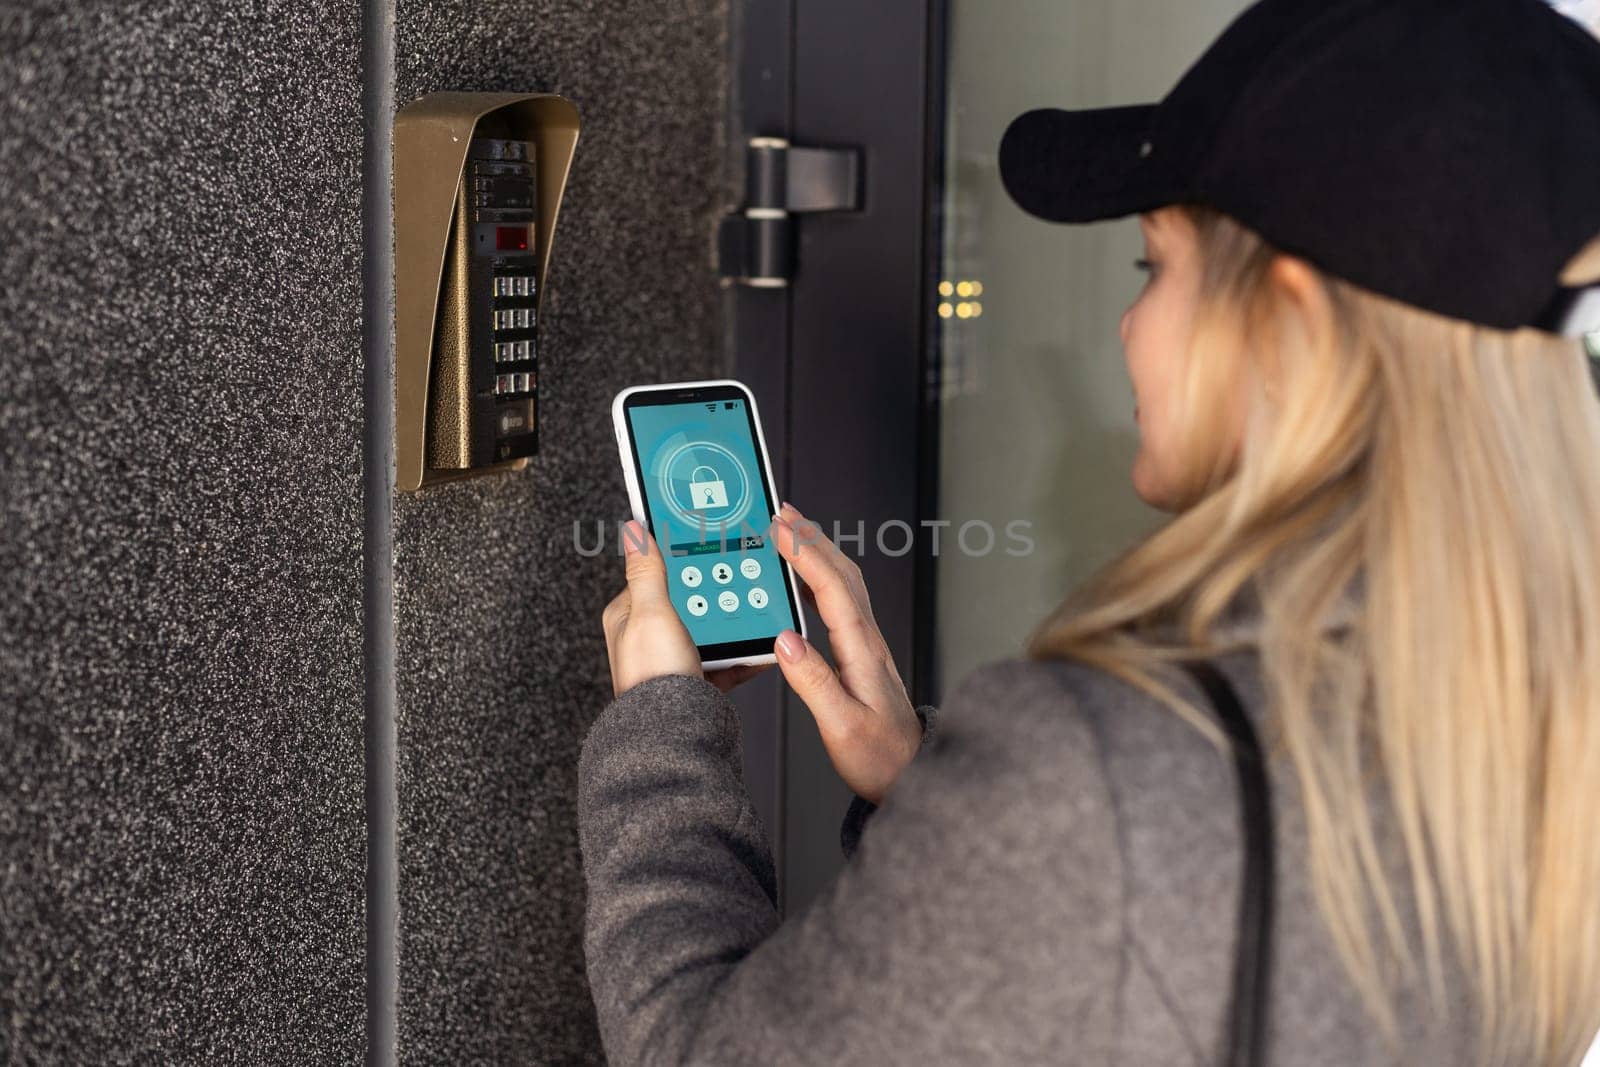 nfc's mobile phone use for open safety door. High quality photo